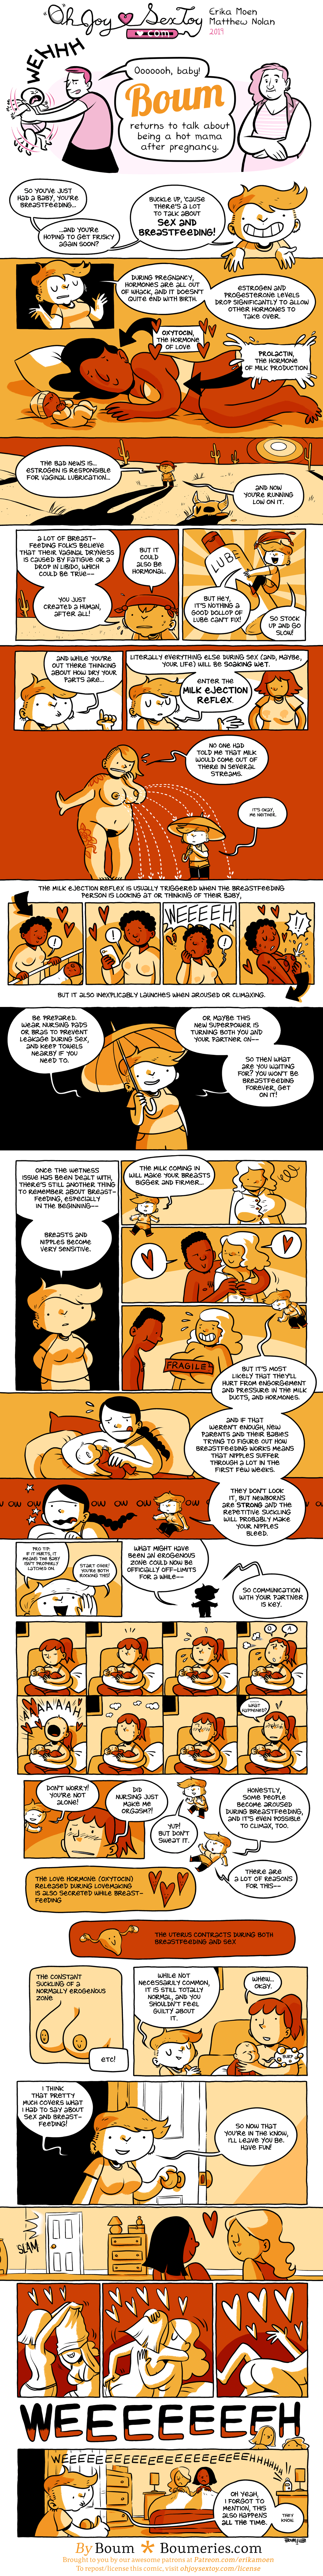 Sex and Breastfeeding by Boum